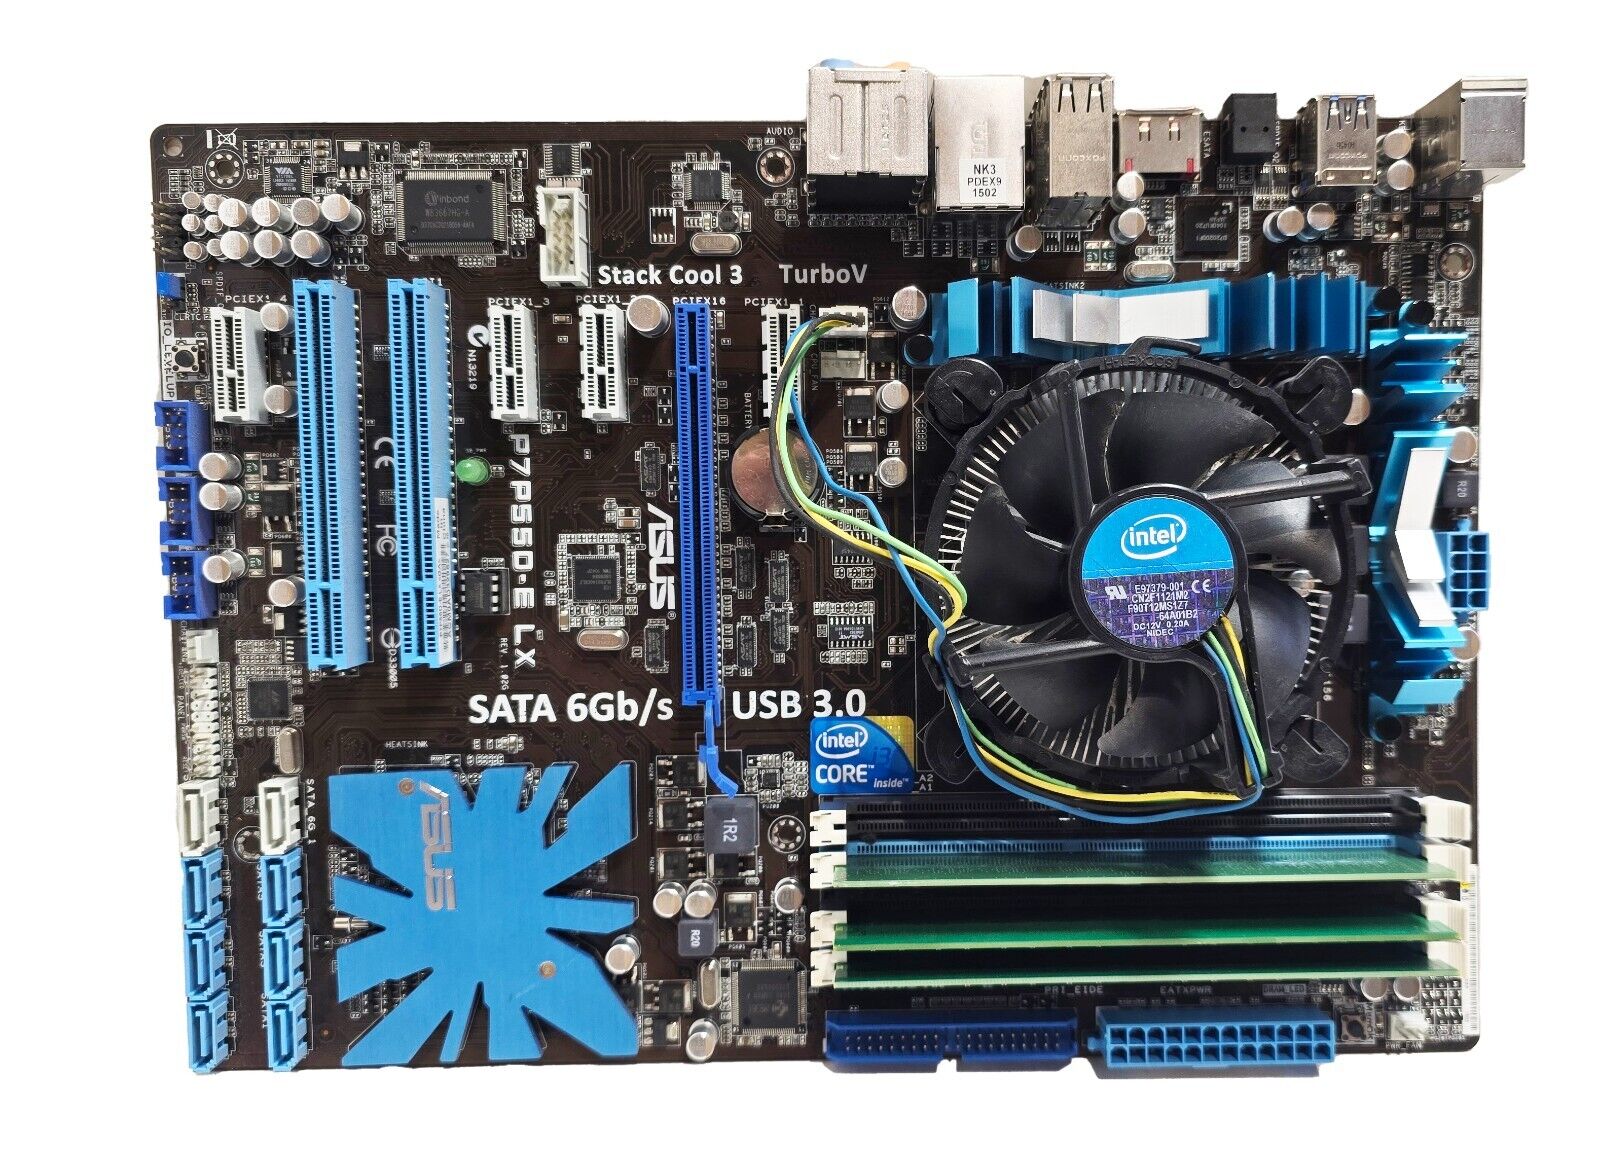 ASUS P7P55D-E LX Motherboard with 3.20 GHz i3-550 + 6GB Ram +H/S and Fan